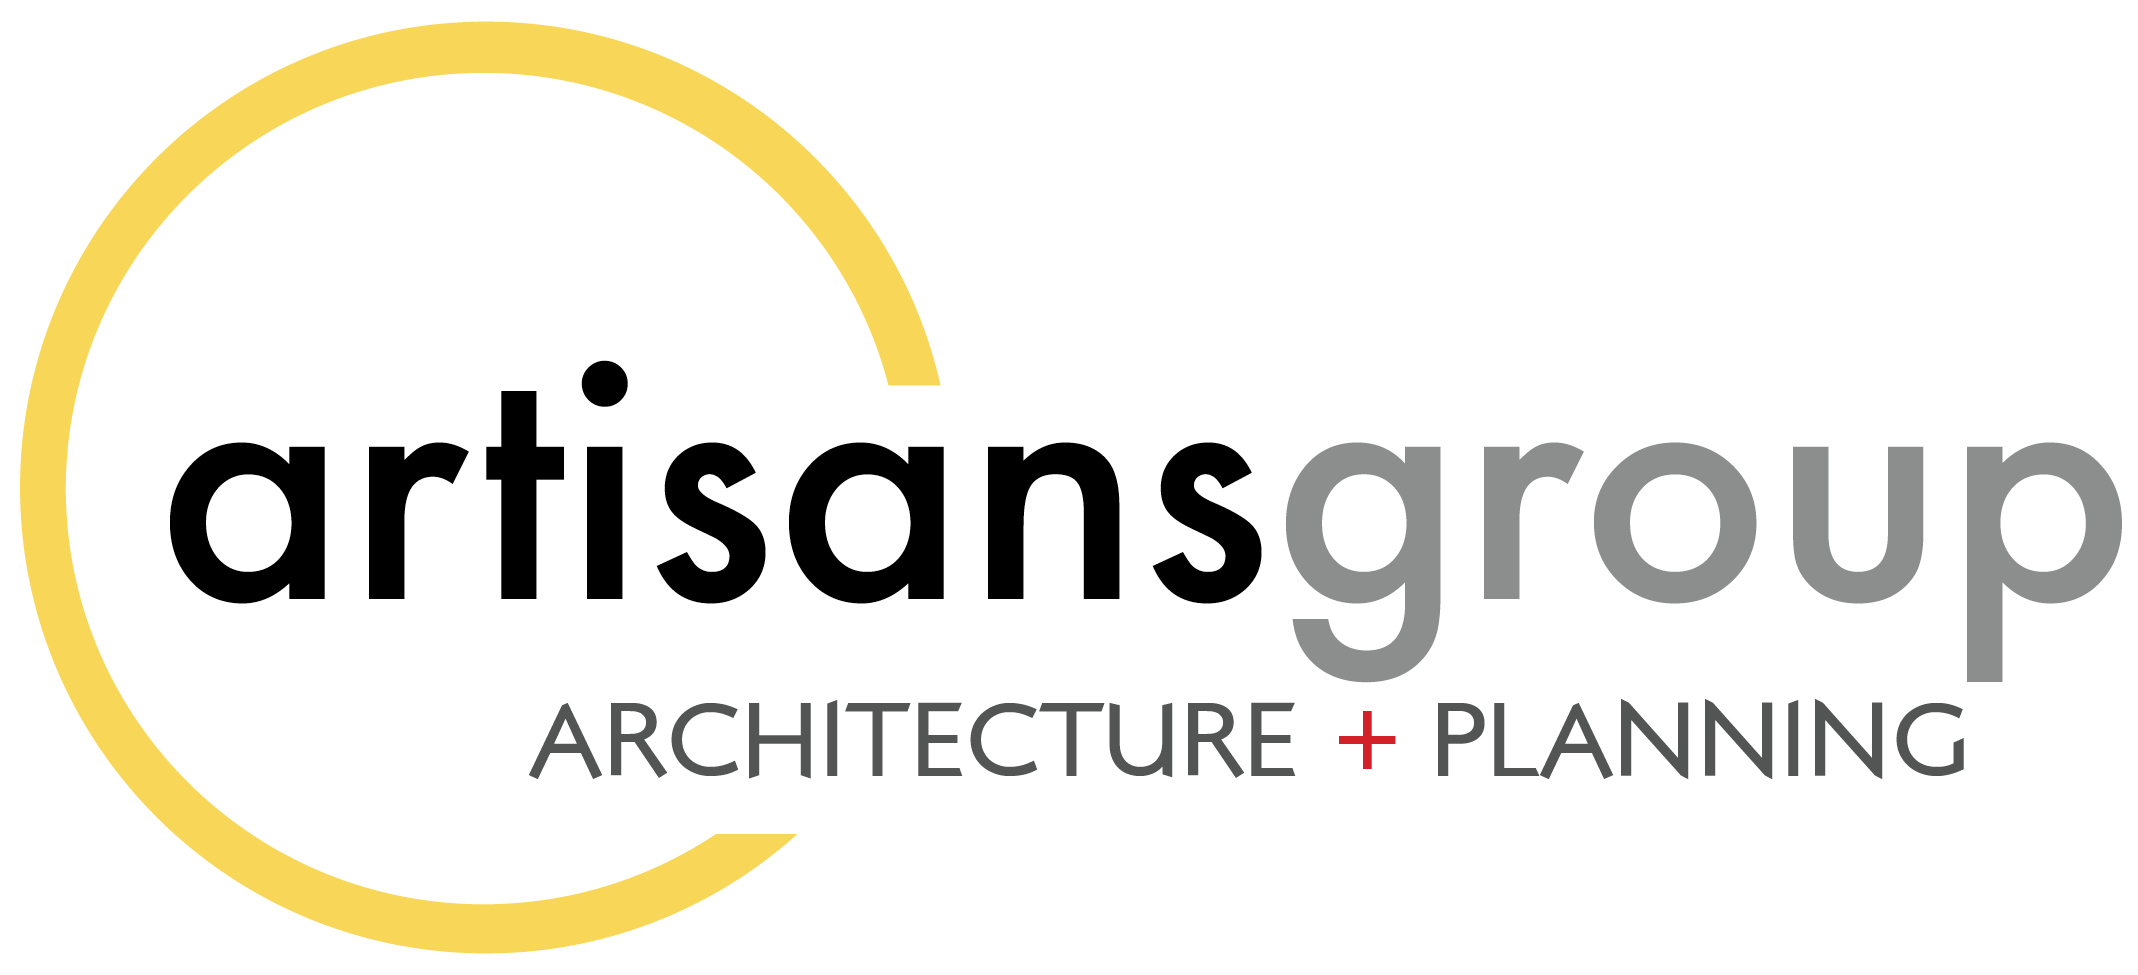 Artisans Group Architecture and Planning company logo